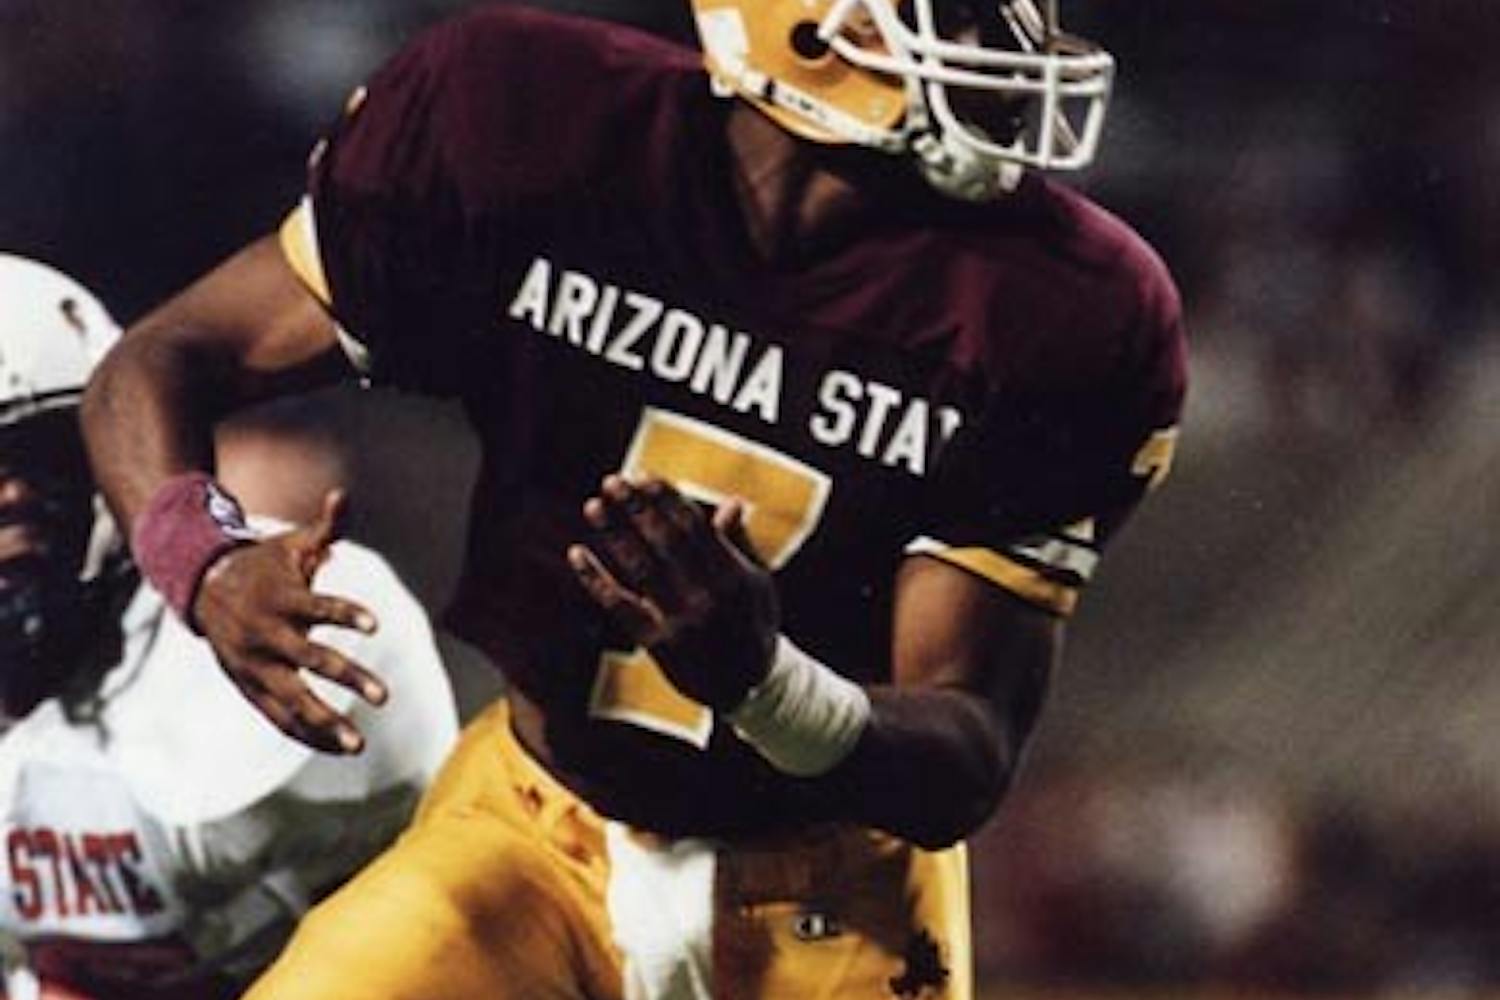 LOOKING BACK: Former ASU football player Isaiah Mustafa has made a name for himself outside of the sports world with his appearances in popular Old Spice commercials. “The man your man could smell like” recently reflected on his time at the University. (Photo Courtesy of ASU Media Relations)